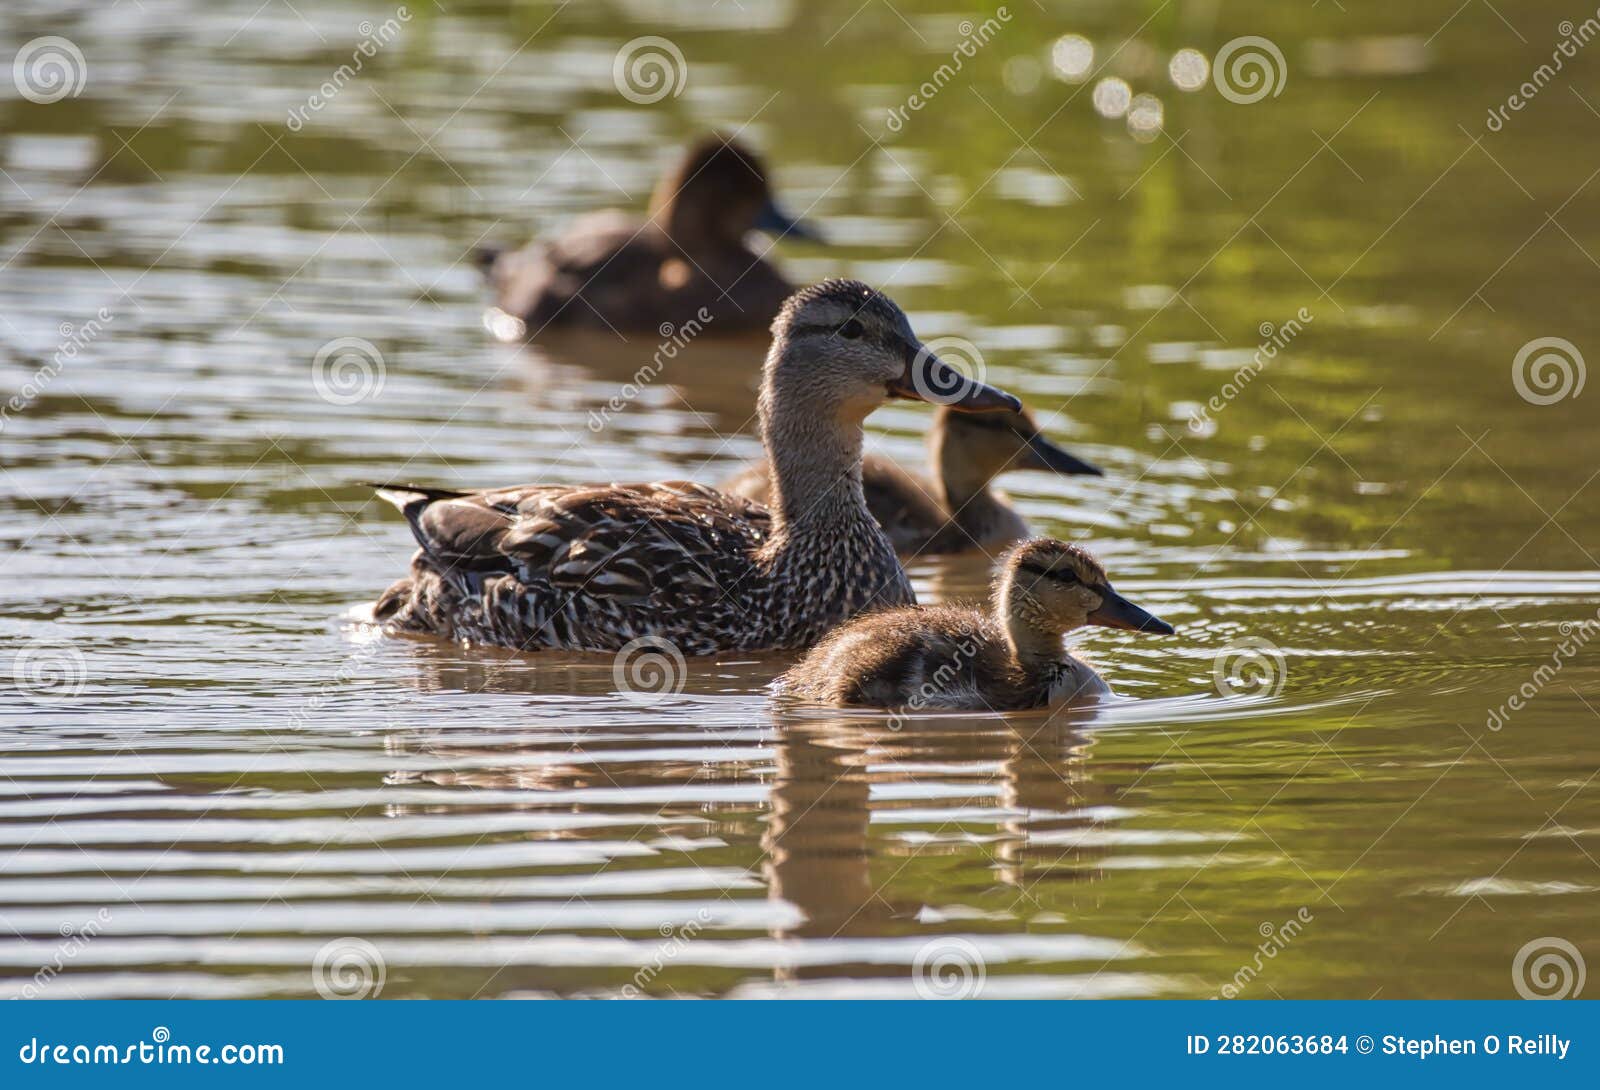 ducks and ducklings in profile